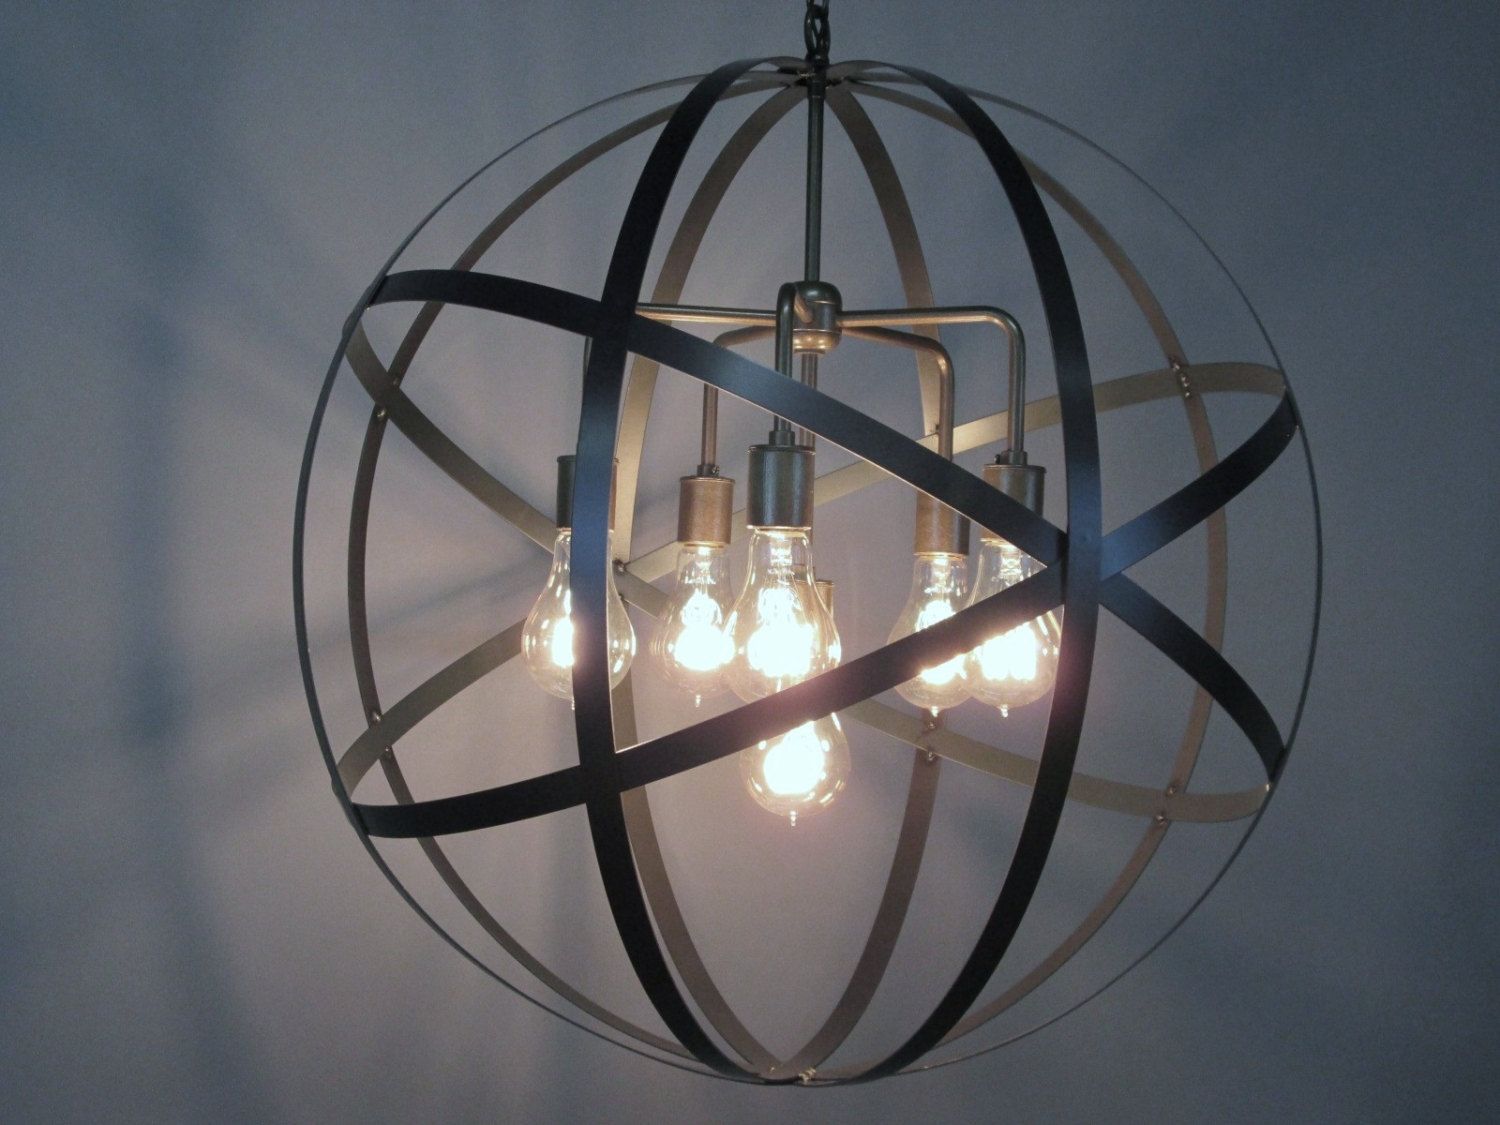 Accessories Home Interior Design And Decor With Sphere Chandelier Pertaining To Metal Sphere Chandelier (Photo 9 of 12)